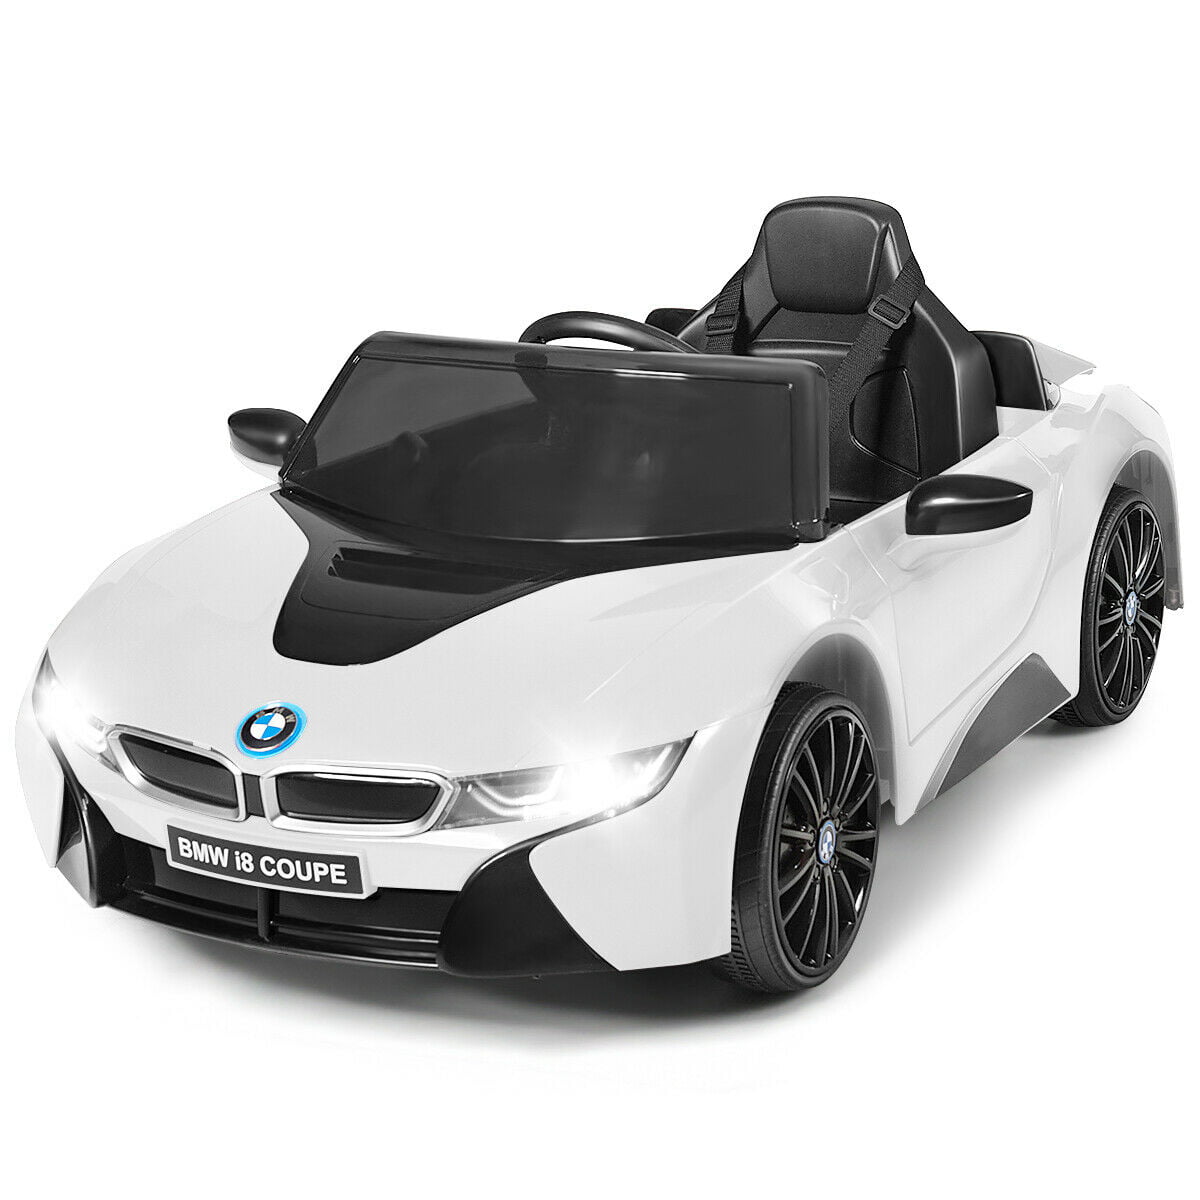 BMW I8 STYLE RIDE ON CAR REMOTE CONTROL ELECTRIC TOY 12V BATTERY rideONEcar 